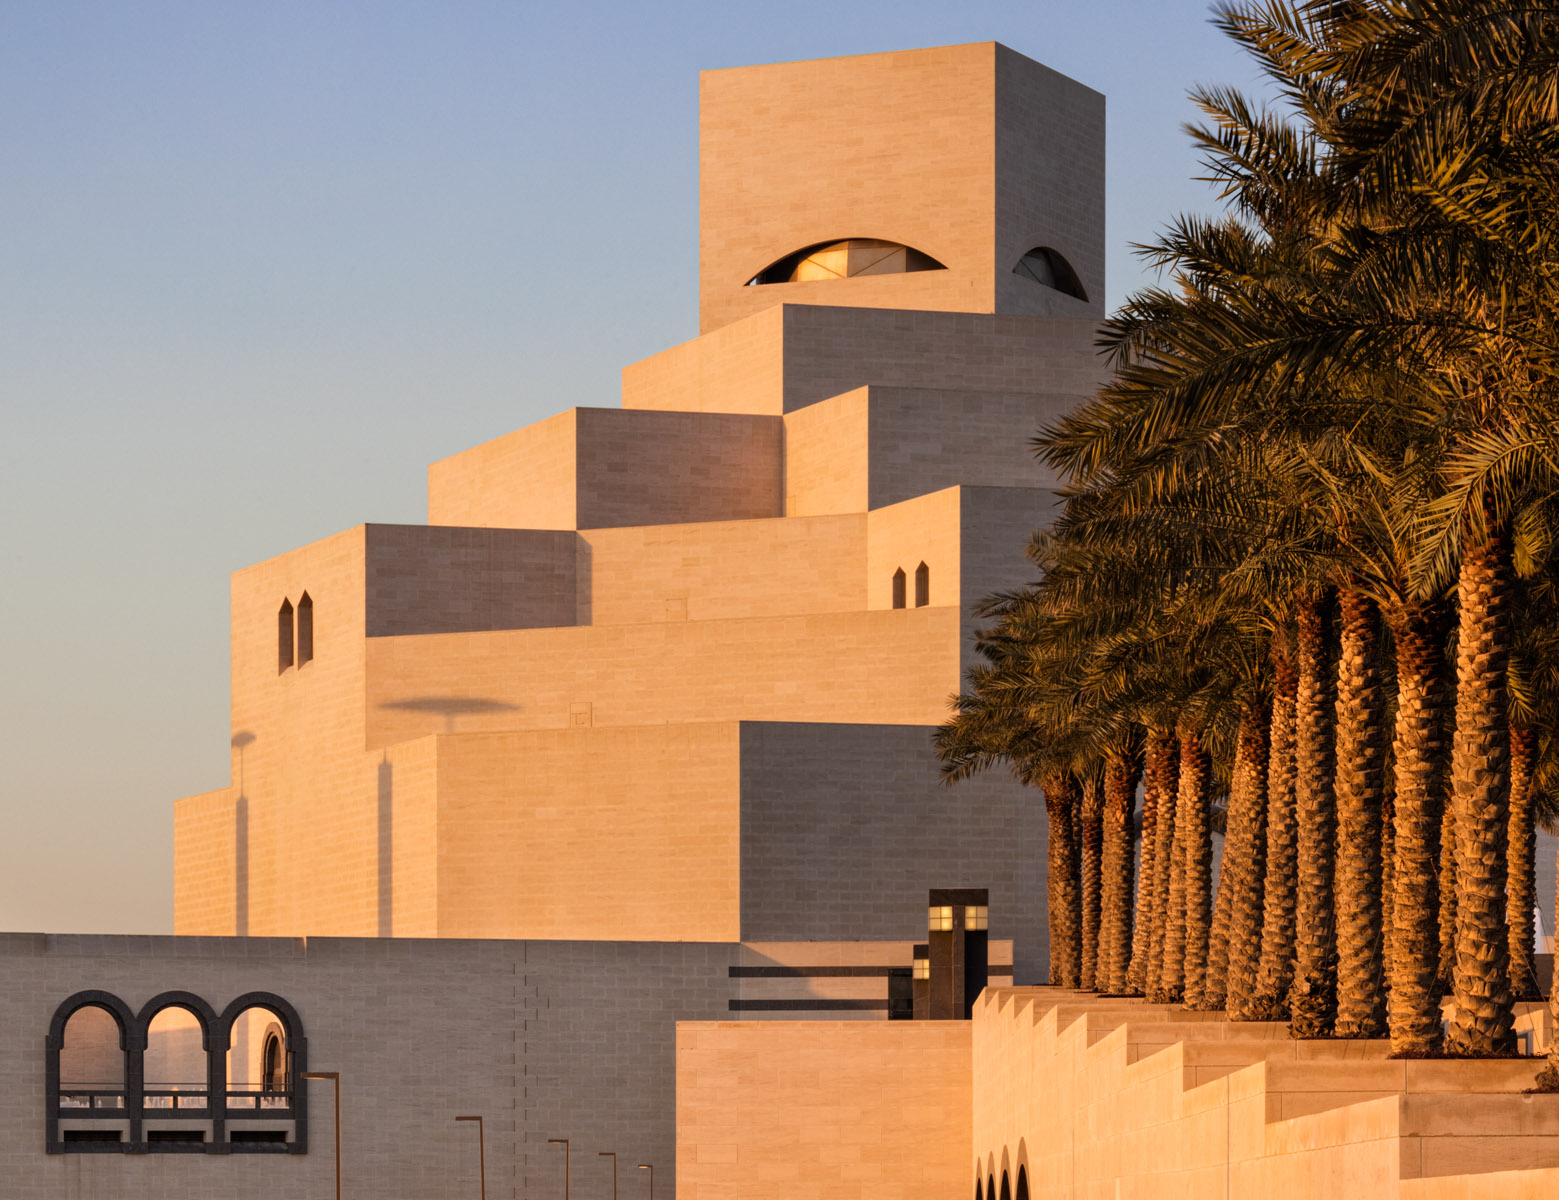 Completed in 2008, Architect I. M. Pei's 45K sq ft museum was designed in sympathy with ancient islamic Architecture.Client: Stalgi